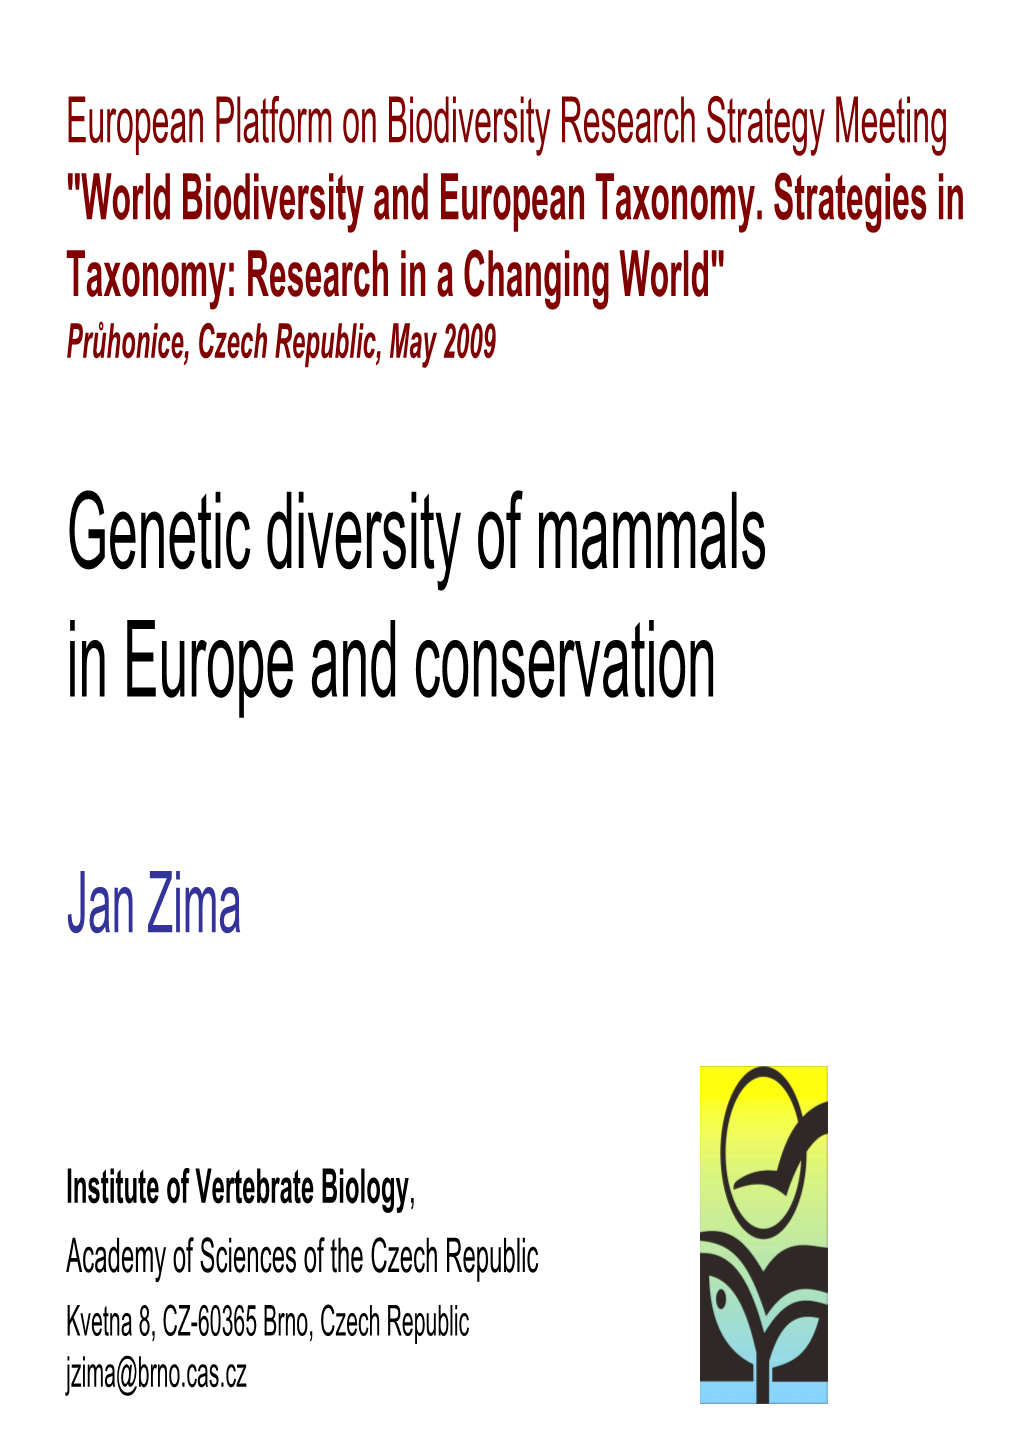 Genetic Diversity of Mammals in Europe and Conservation